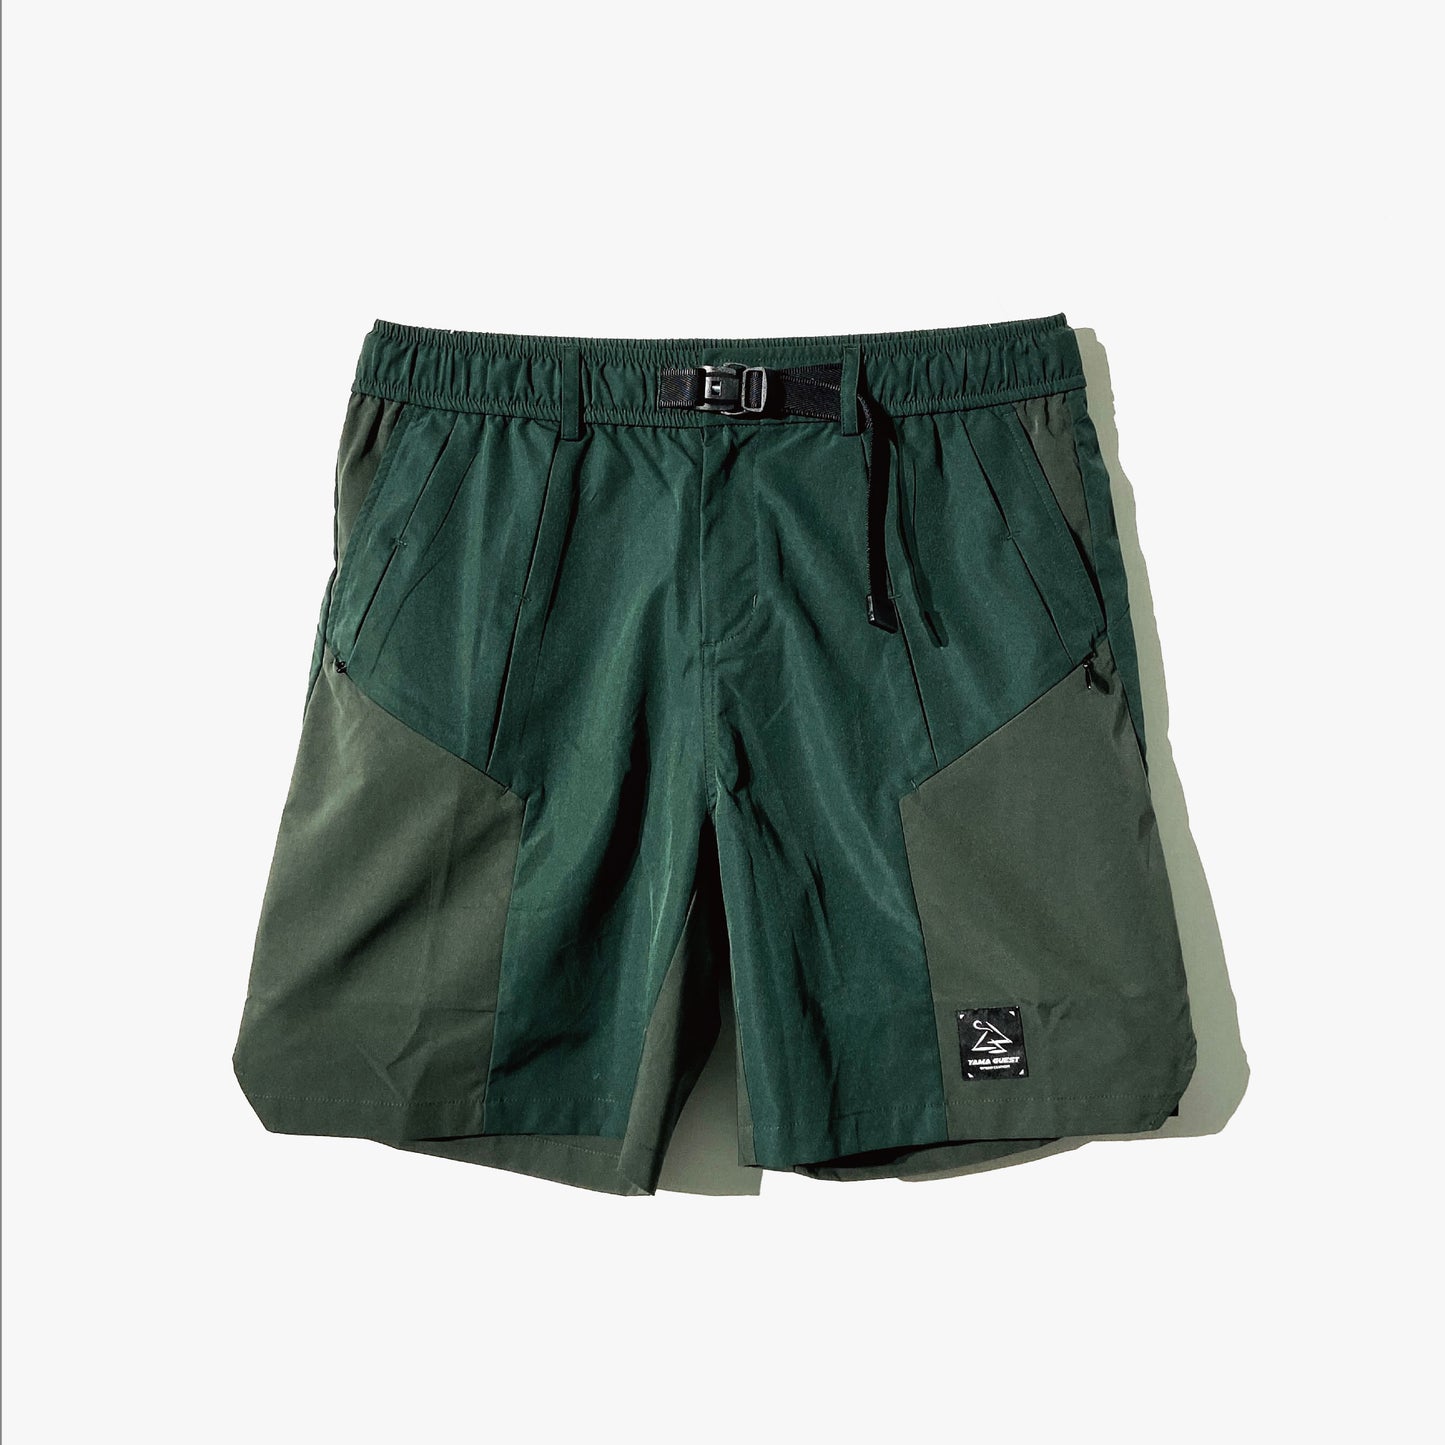 SP08 Meditate Functional Shorts (GRX)